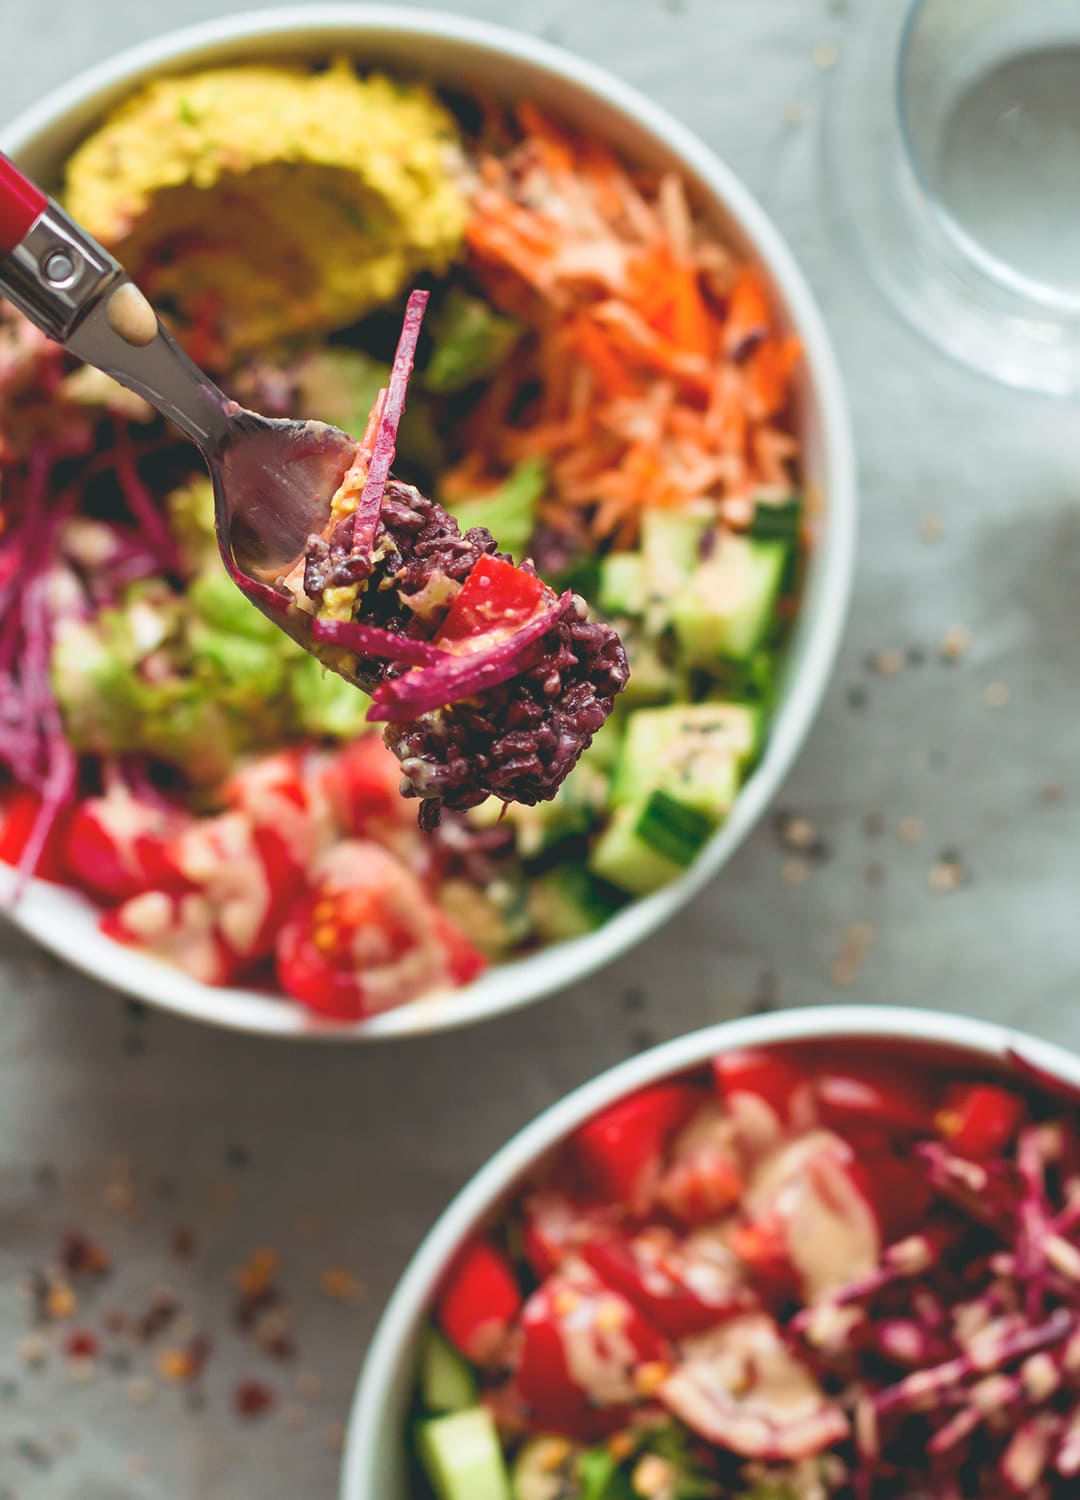 Black Rice Salad Bowl with Tahini Dressing - easy to make fresh summer salad. I love to make this ahead for busy work days! Tomatoes, cucumber, beets, carrots, hummus, lettuce, black rice, and tahini dressing. (vegan, GF) | thehealthfulideas.com